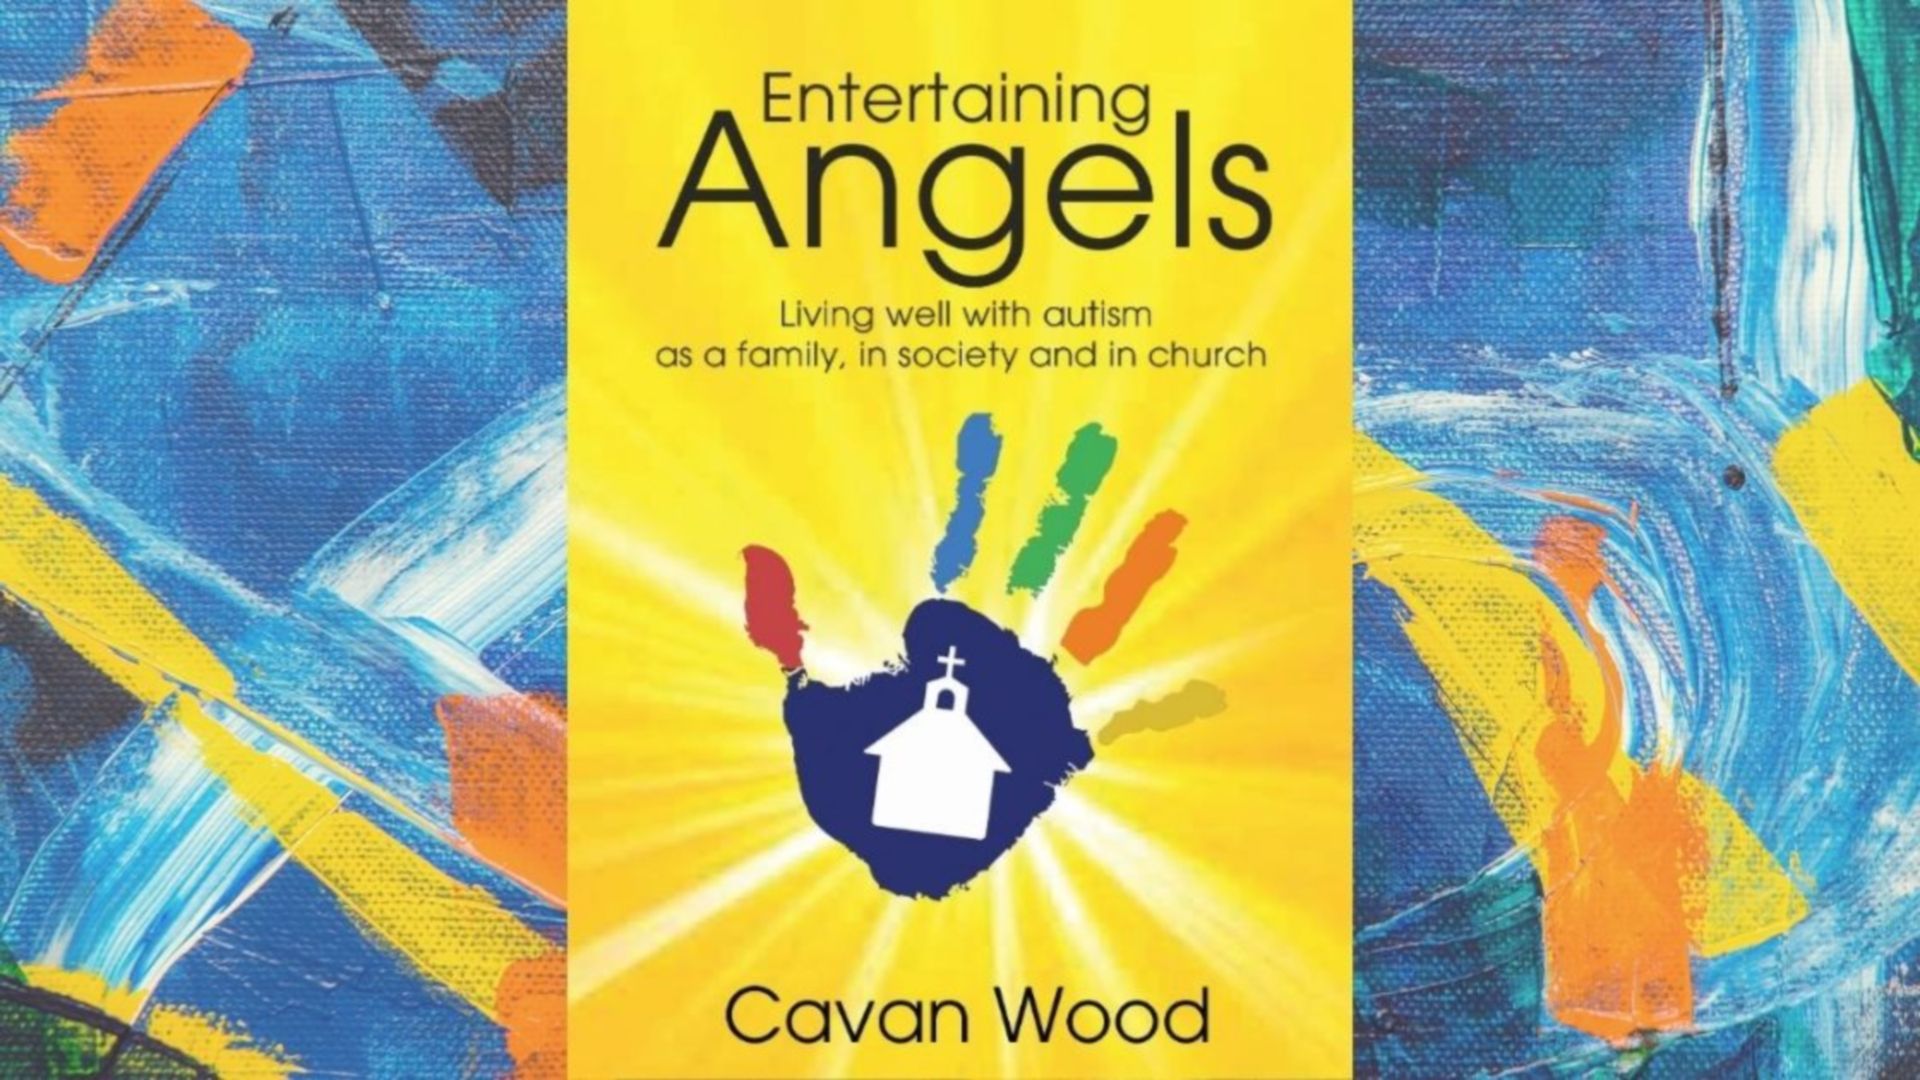 Interview with Cavan Wood, author of 'Entertaining Angels'